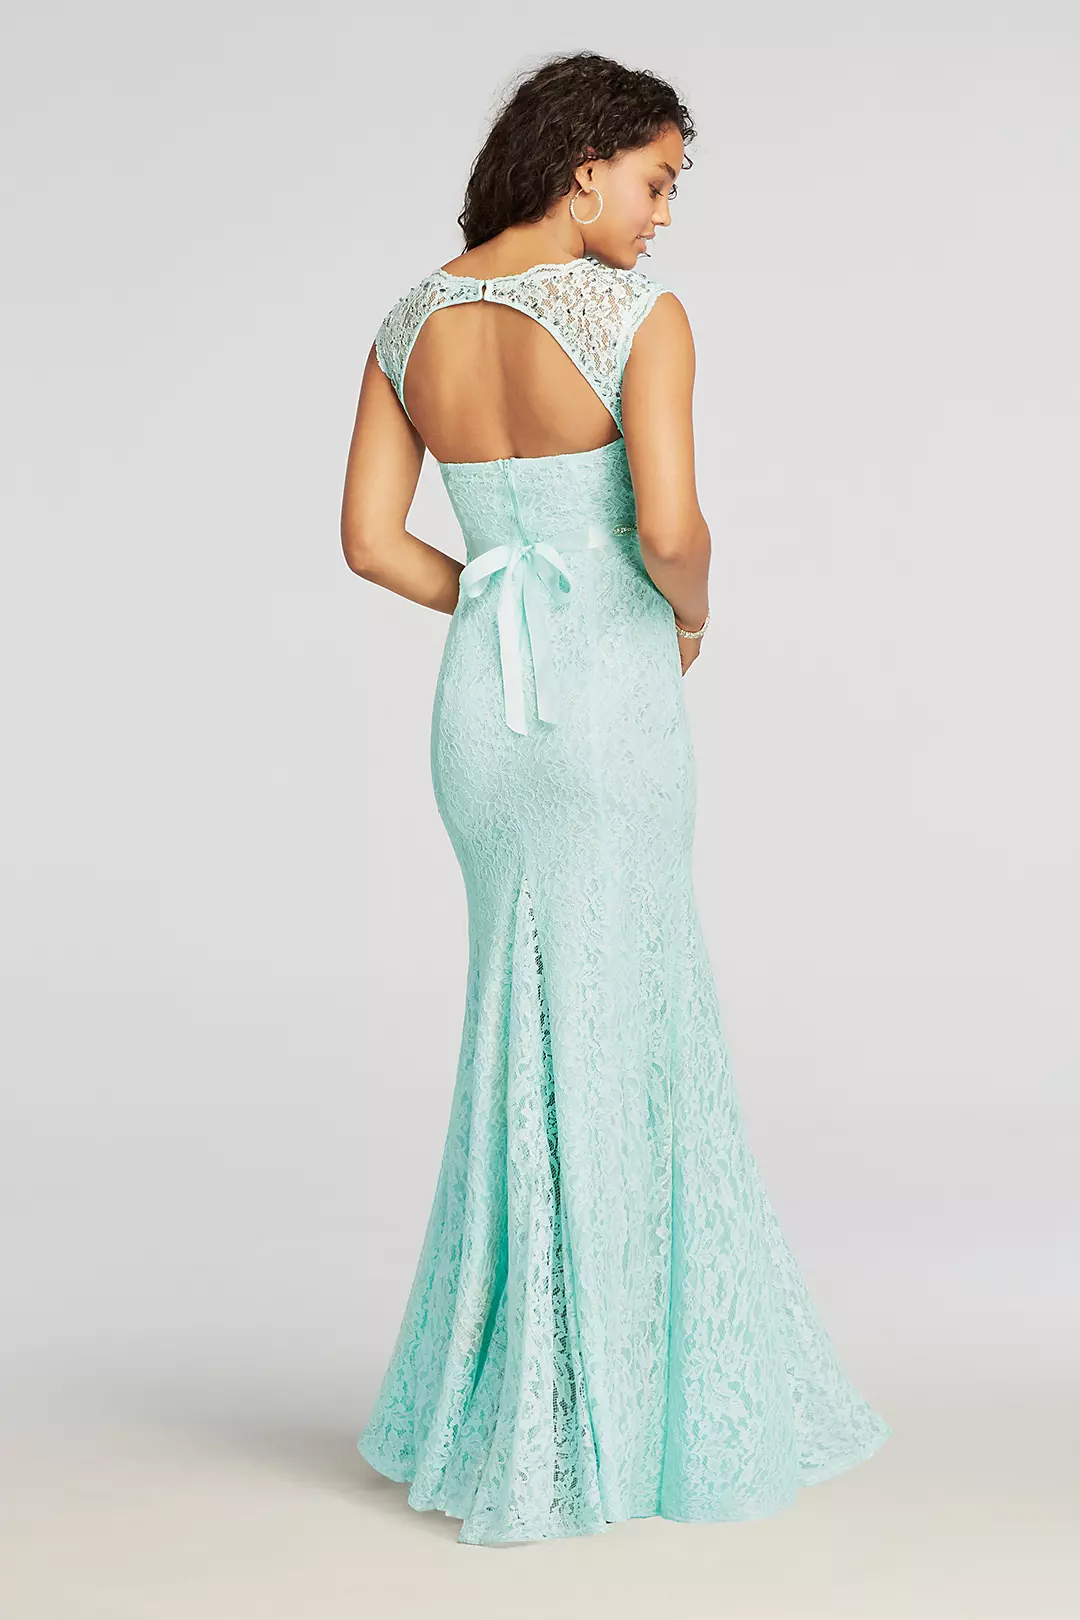 Lace Cap Sleeve Prom Dress with Beaded Waist Image 2